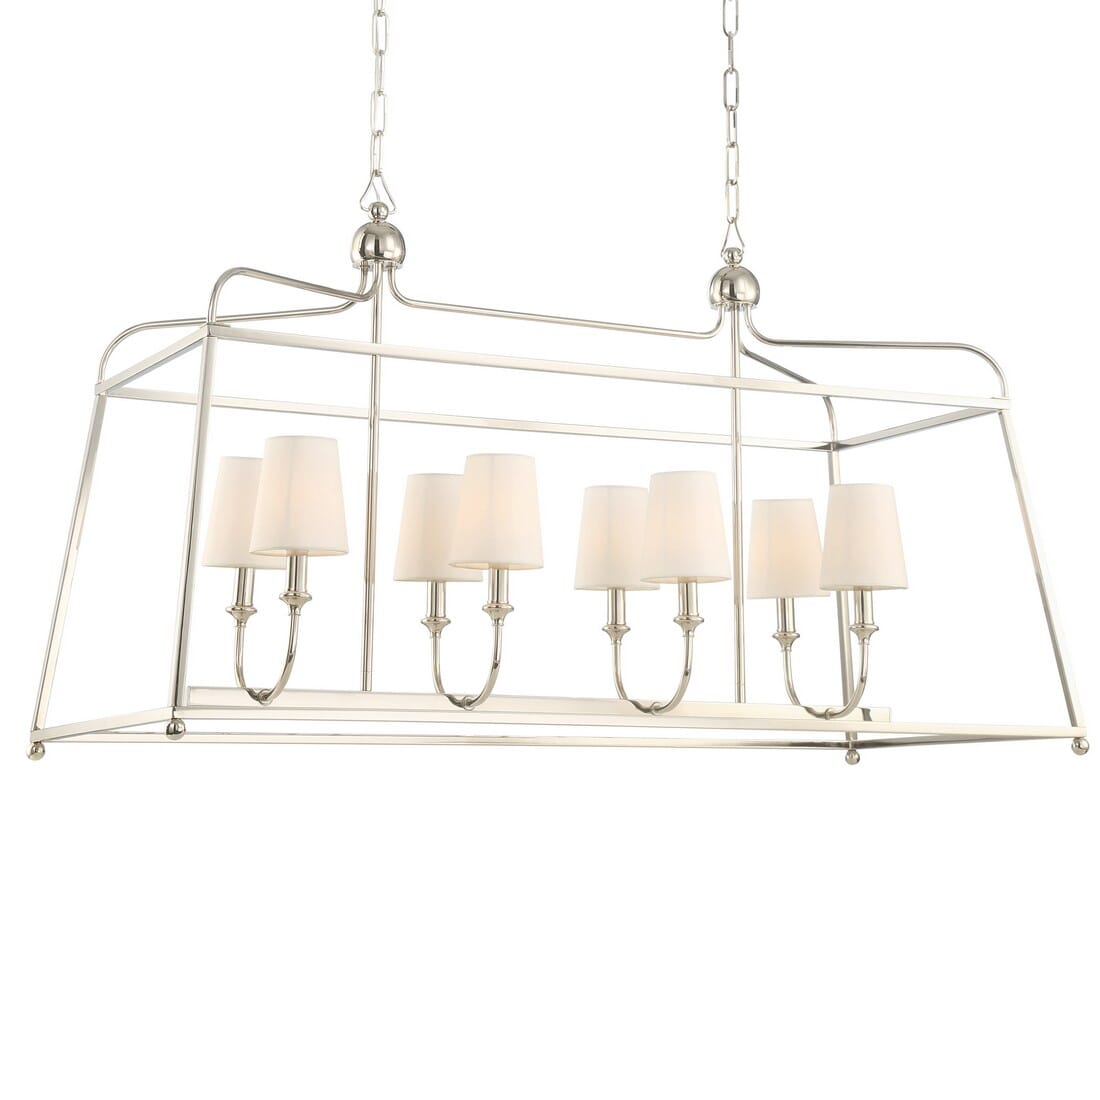 Libby Langdon for Sylvan 25" Linear Chandelier in Polished Nickel